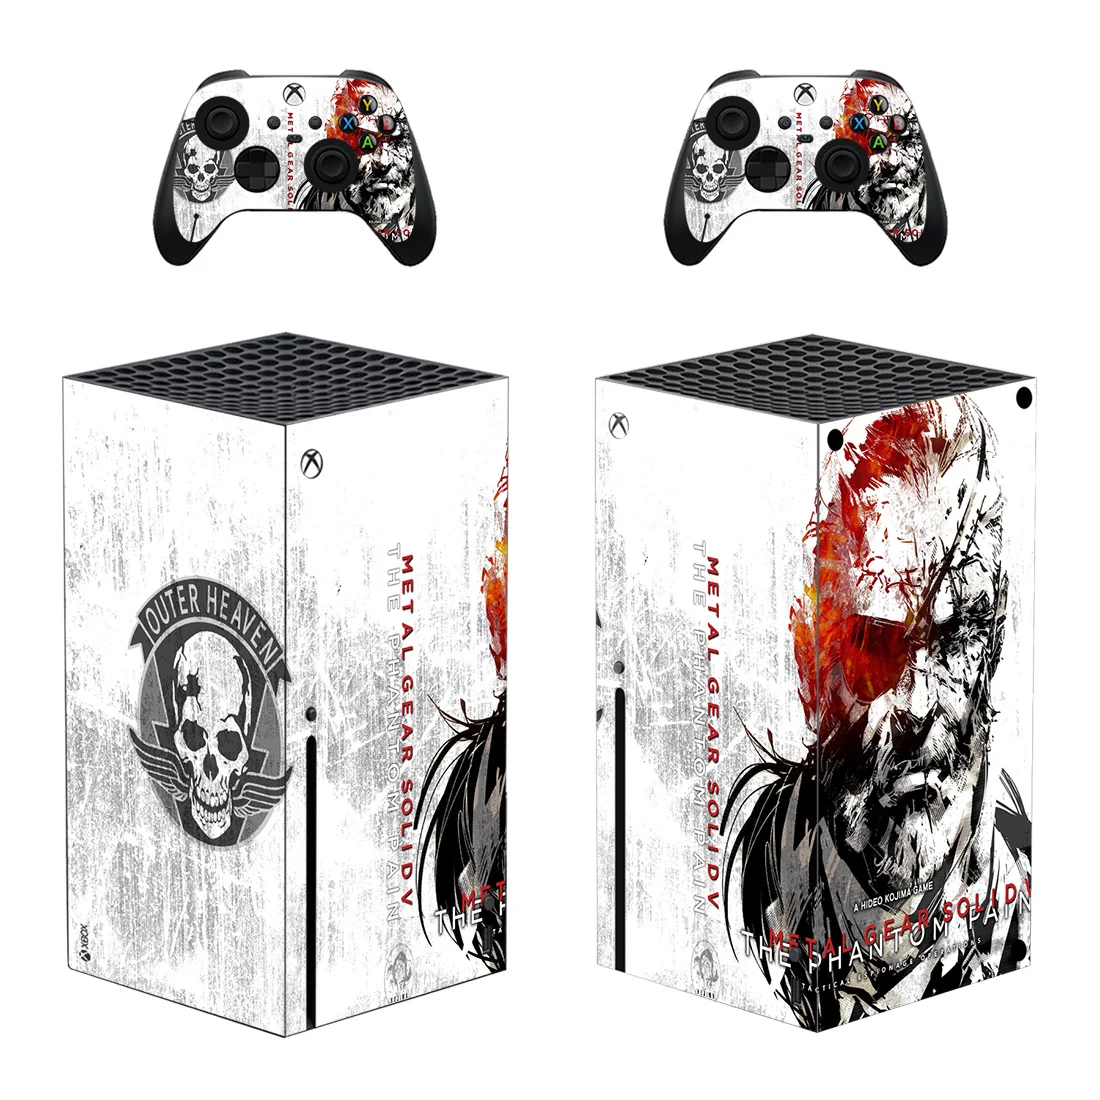 Stickers Metal Gear Solid V Skin Sticker Decal Cover for Xbox Series X Console and 2 Controllers Xbox Series X Skin Sticker Vinyl